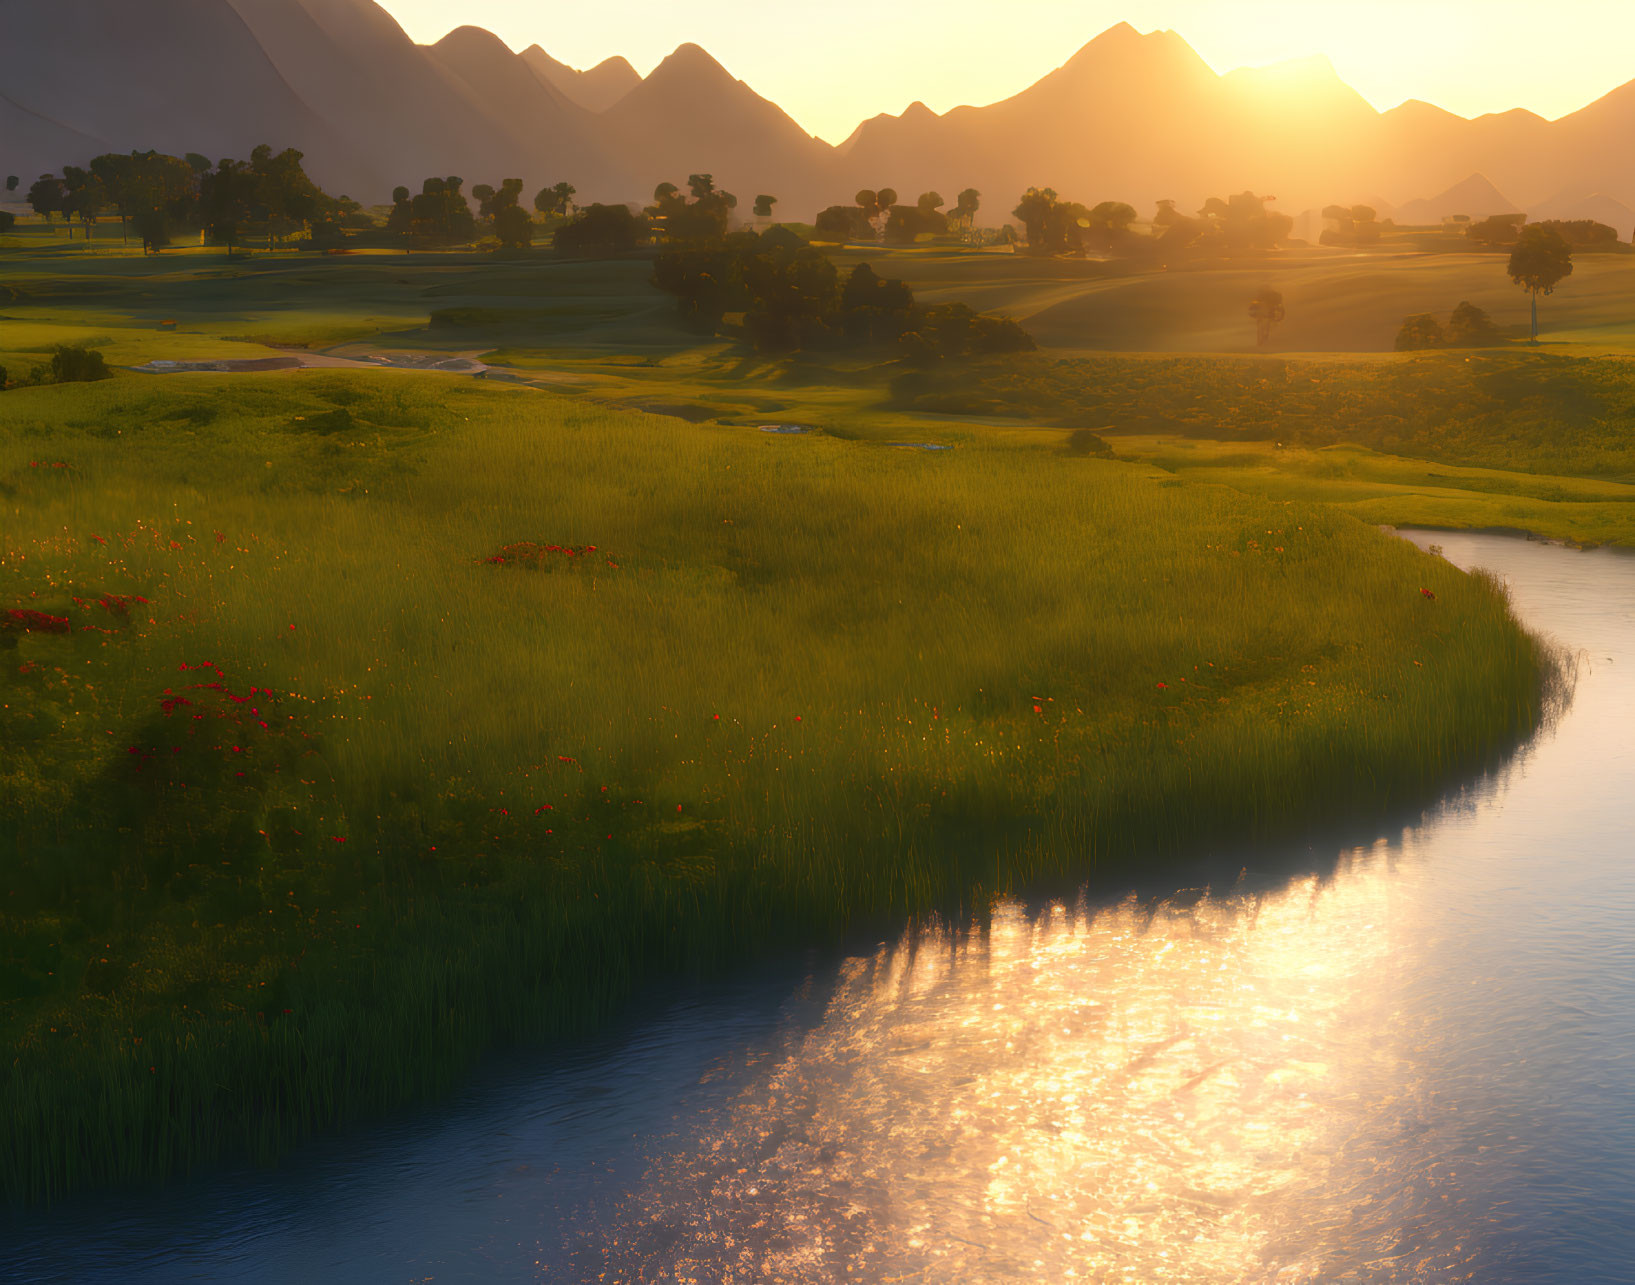 Serene landscape with river, green fields, red flowers, and mountains